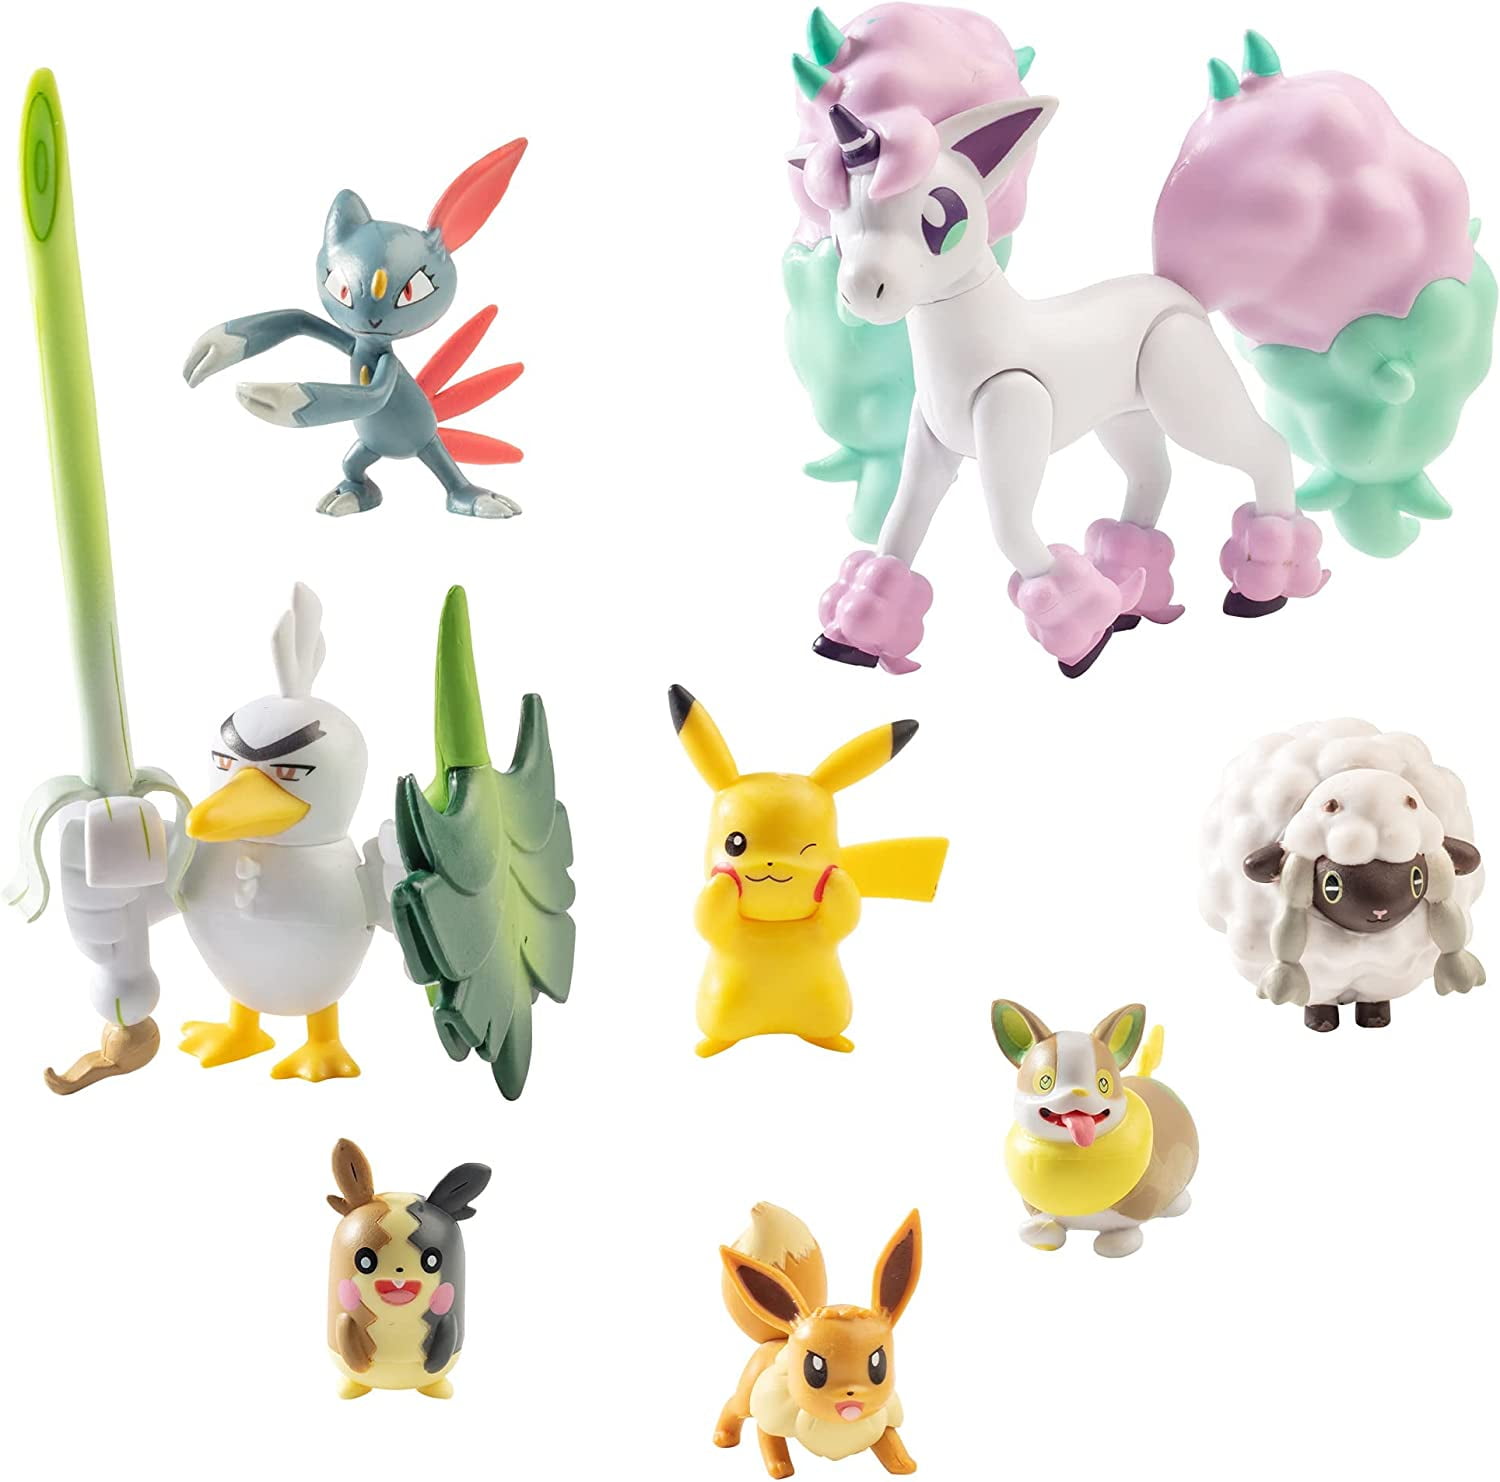 Pokemon Battle Figure Multi Pack Toy Set, 8 Pieces - Generation 8 -  Includes Pikachu, Eevee, Wooloo, Sneasel, Yamper, Ponyta, Sirfetch'd &  Morpeko - Ages 4+ 